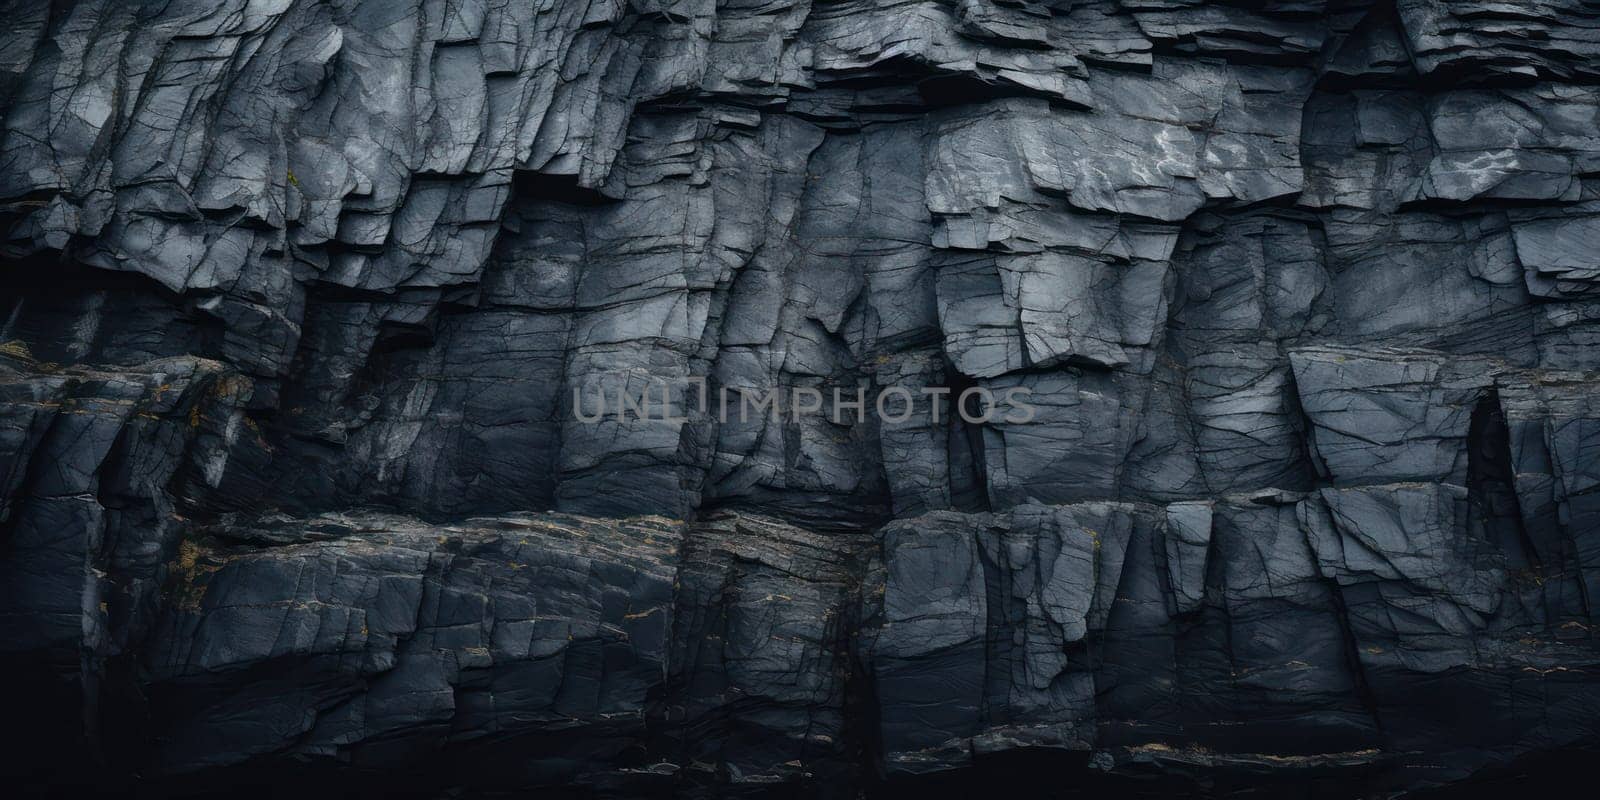 Rough, Textured Rock Surface: A Dark, Ancient Wall of Gray, Hard Stone.